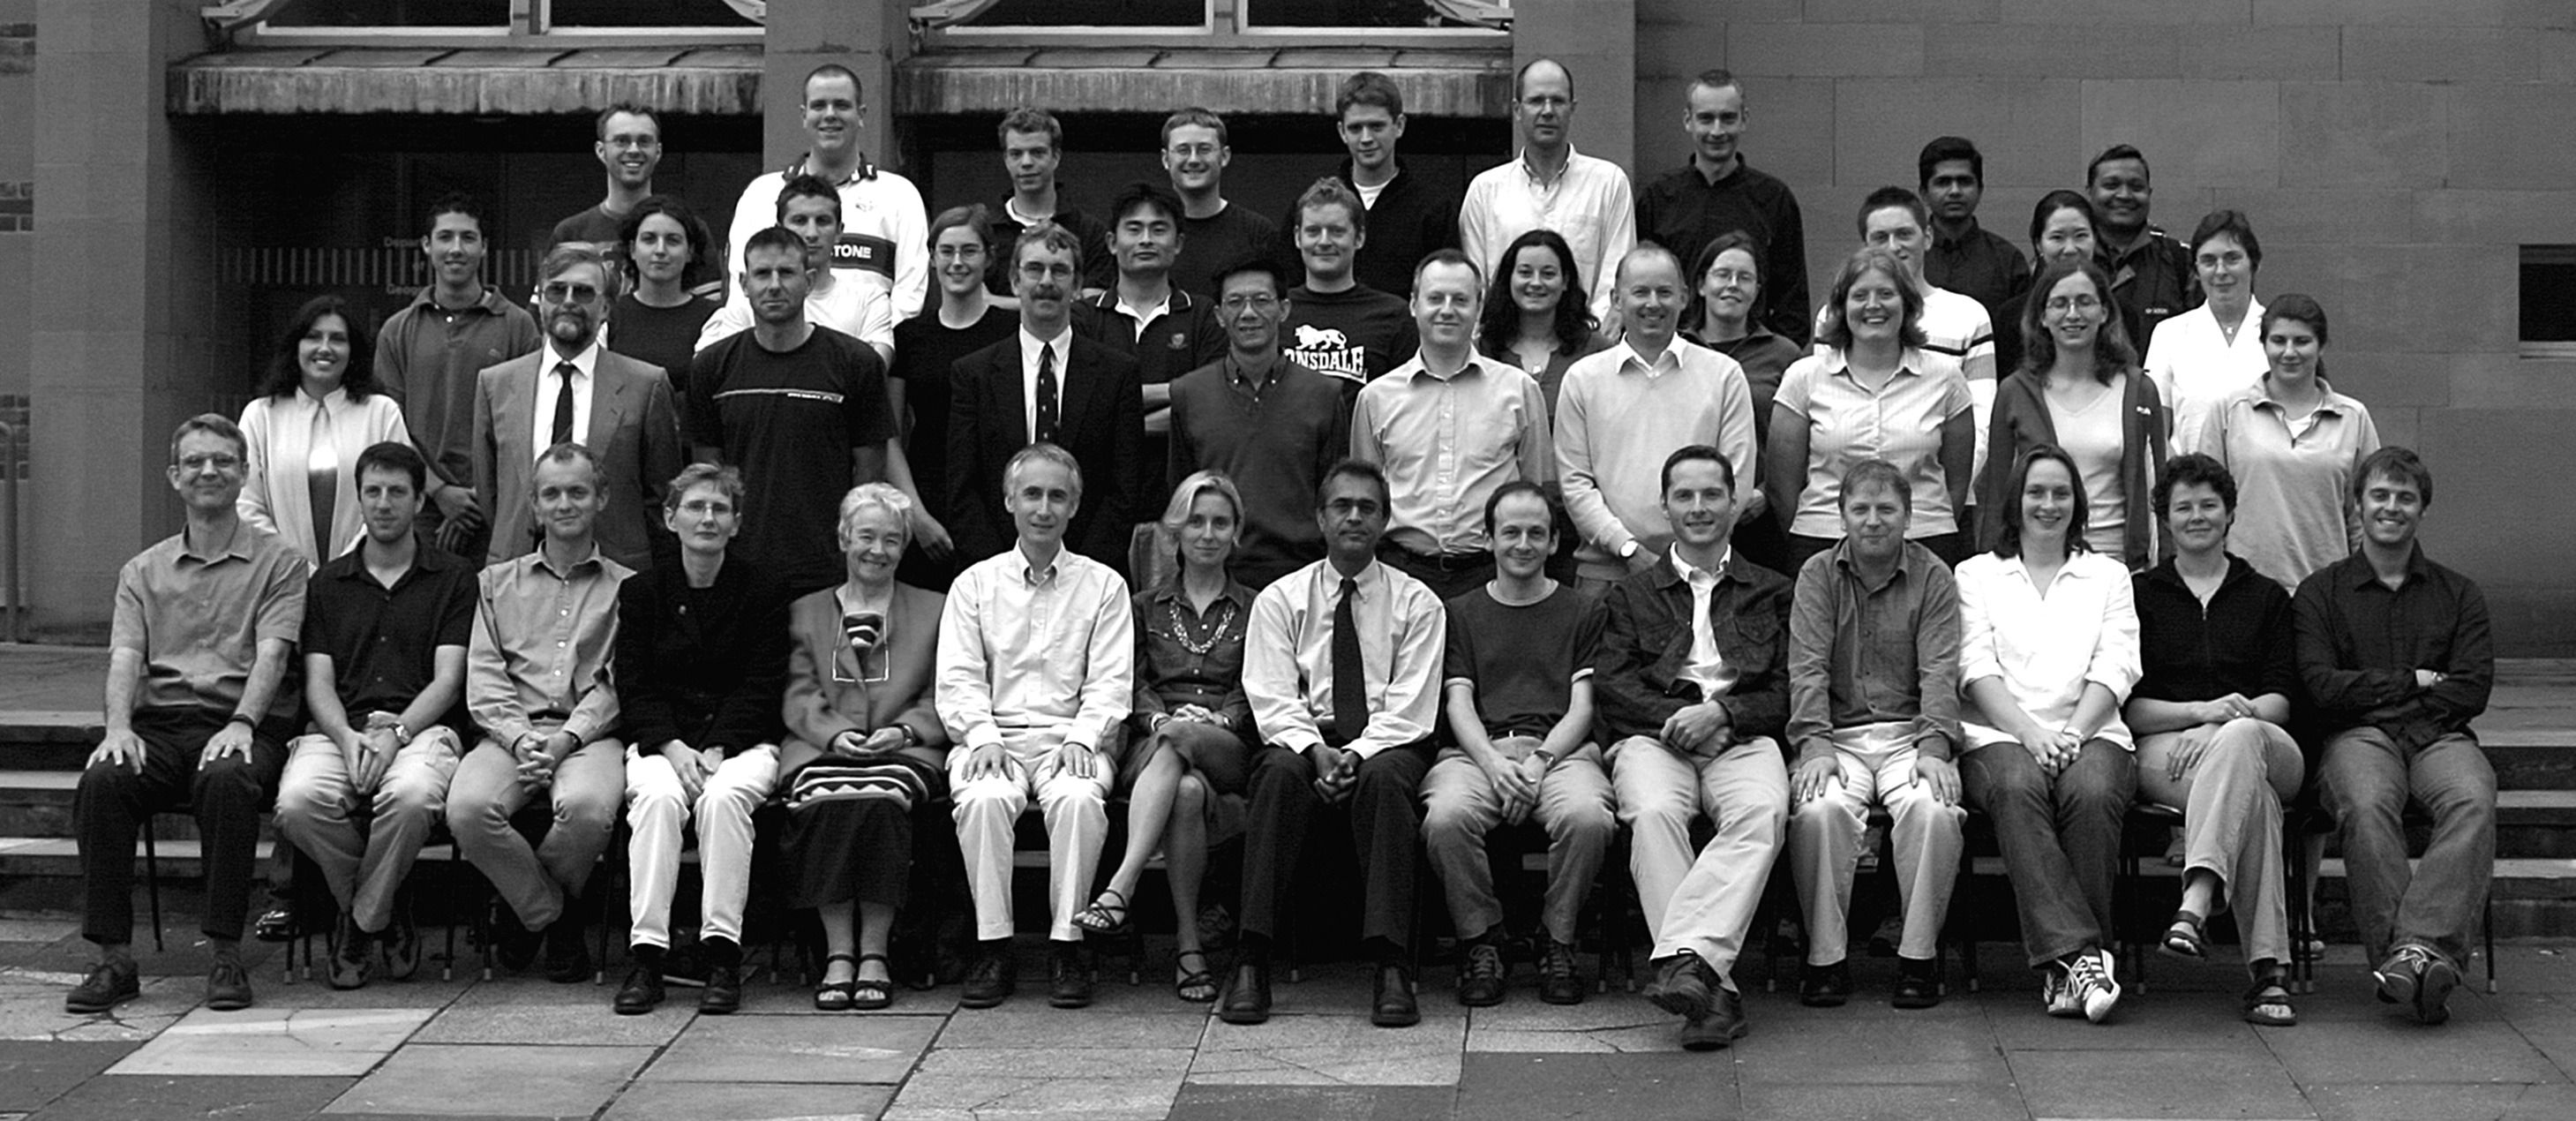 Geography Department Postgraduate Group Photo from 2003